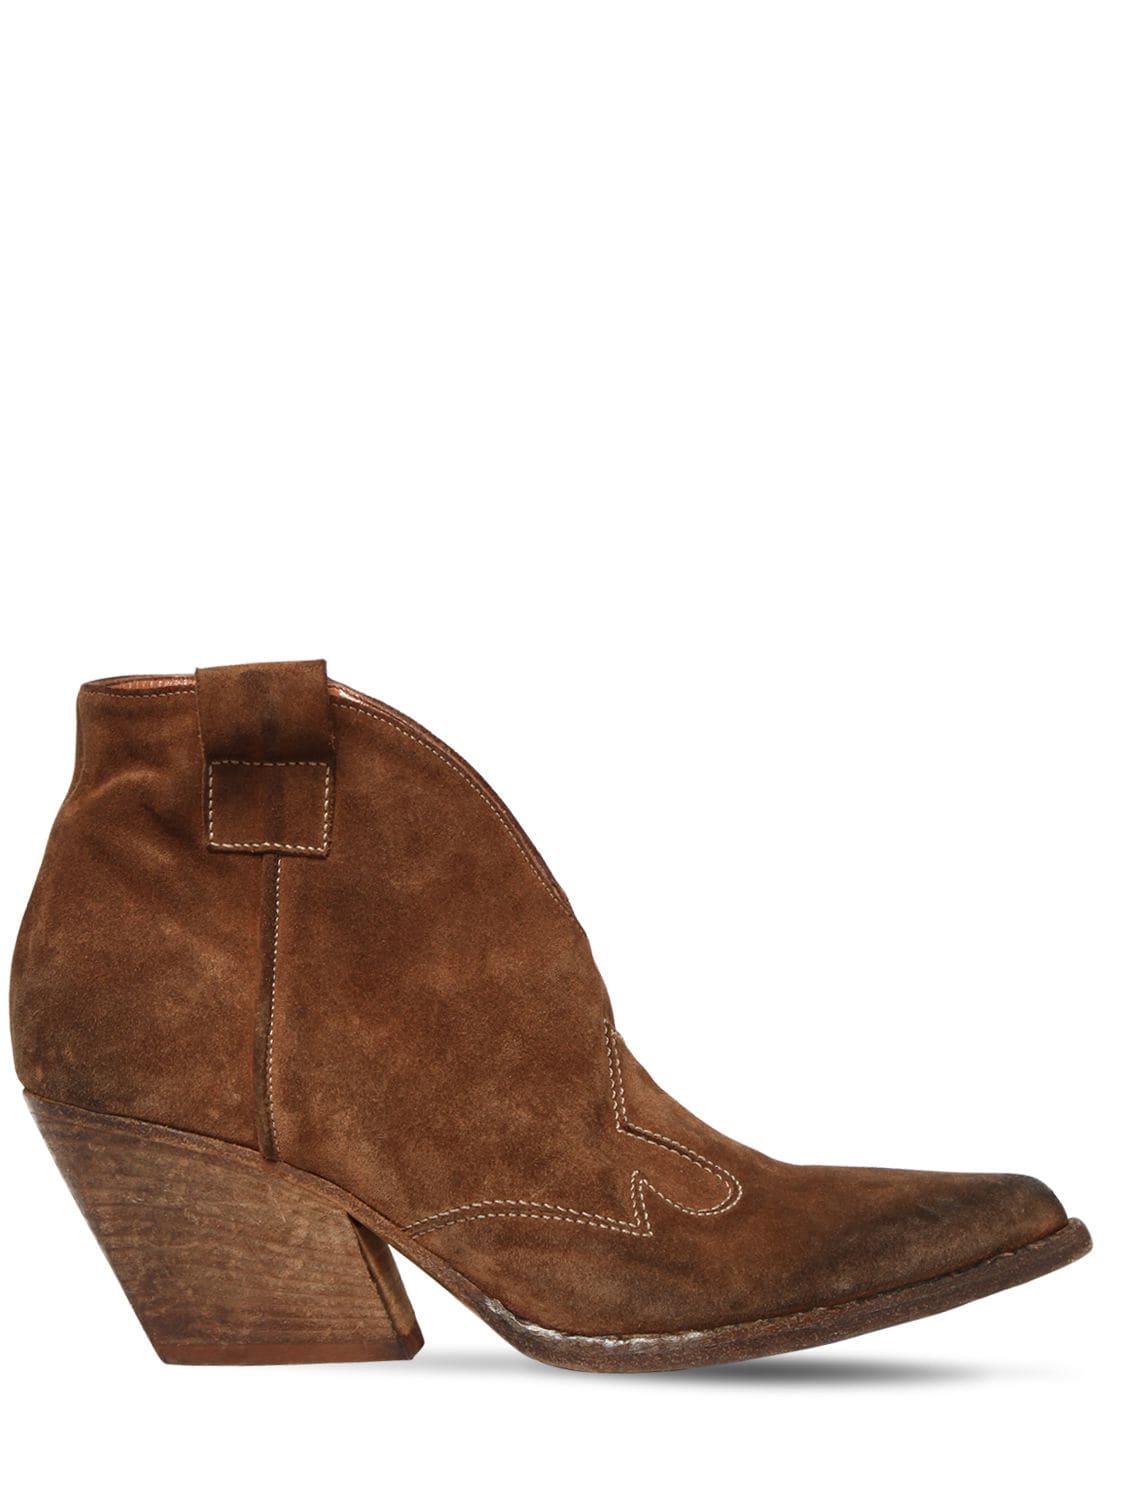 Elena Iachi 60mm Vintage Effect Leather Cowboy Boots In Tan